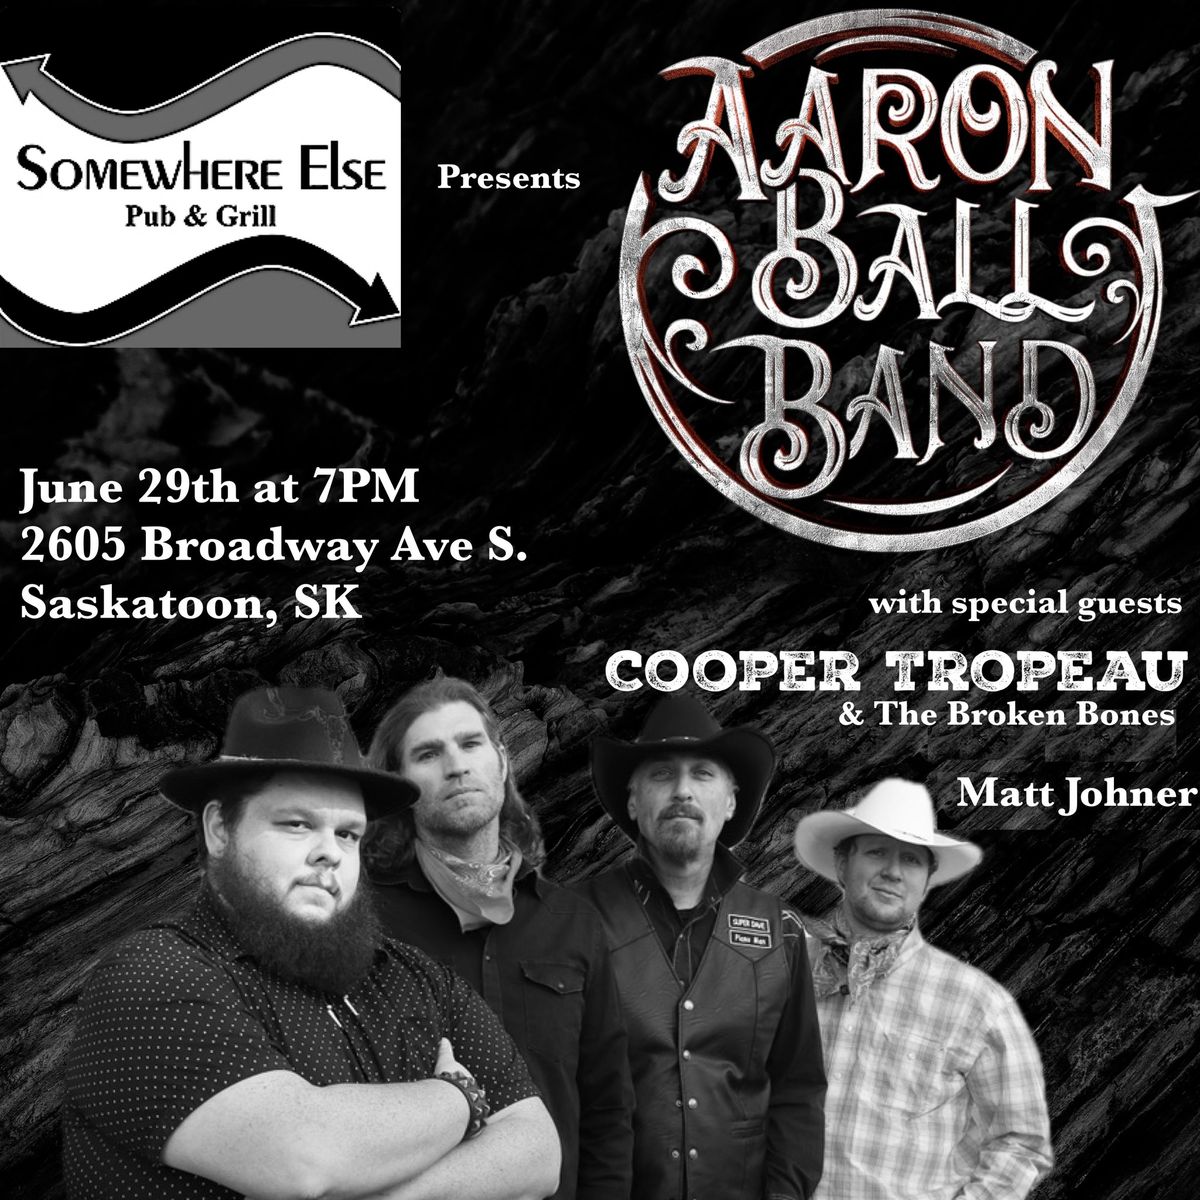 Somewhere Else Pub & Grill presents Aaron Ball Band